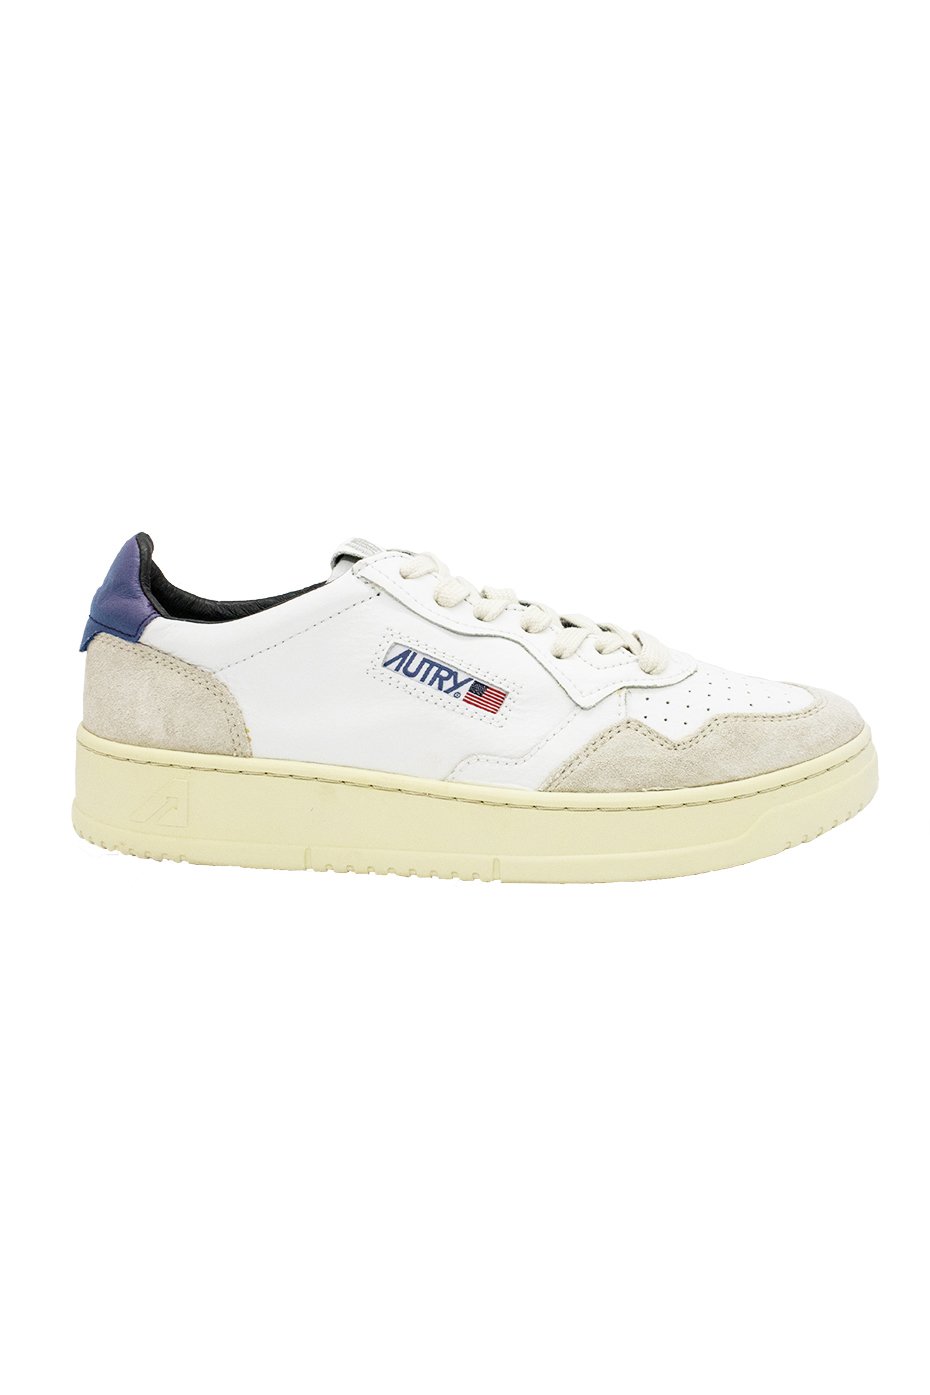 Autry Medalist 01 Suede and Leather Vintage 80 S Sneaker Mens (More colours available)